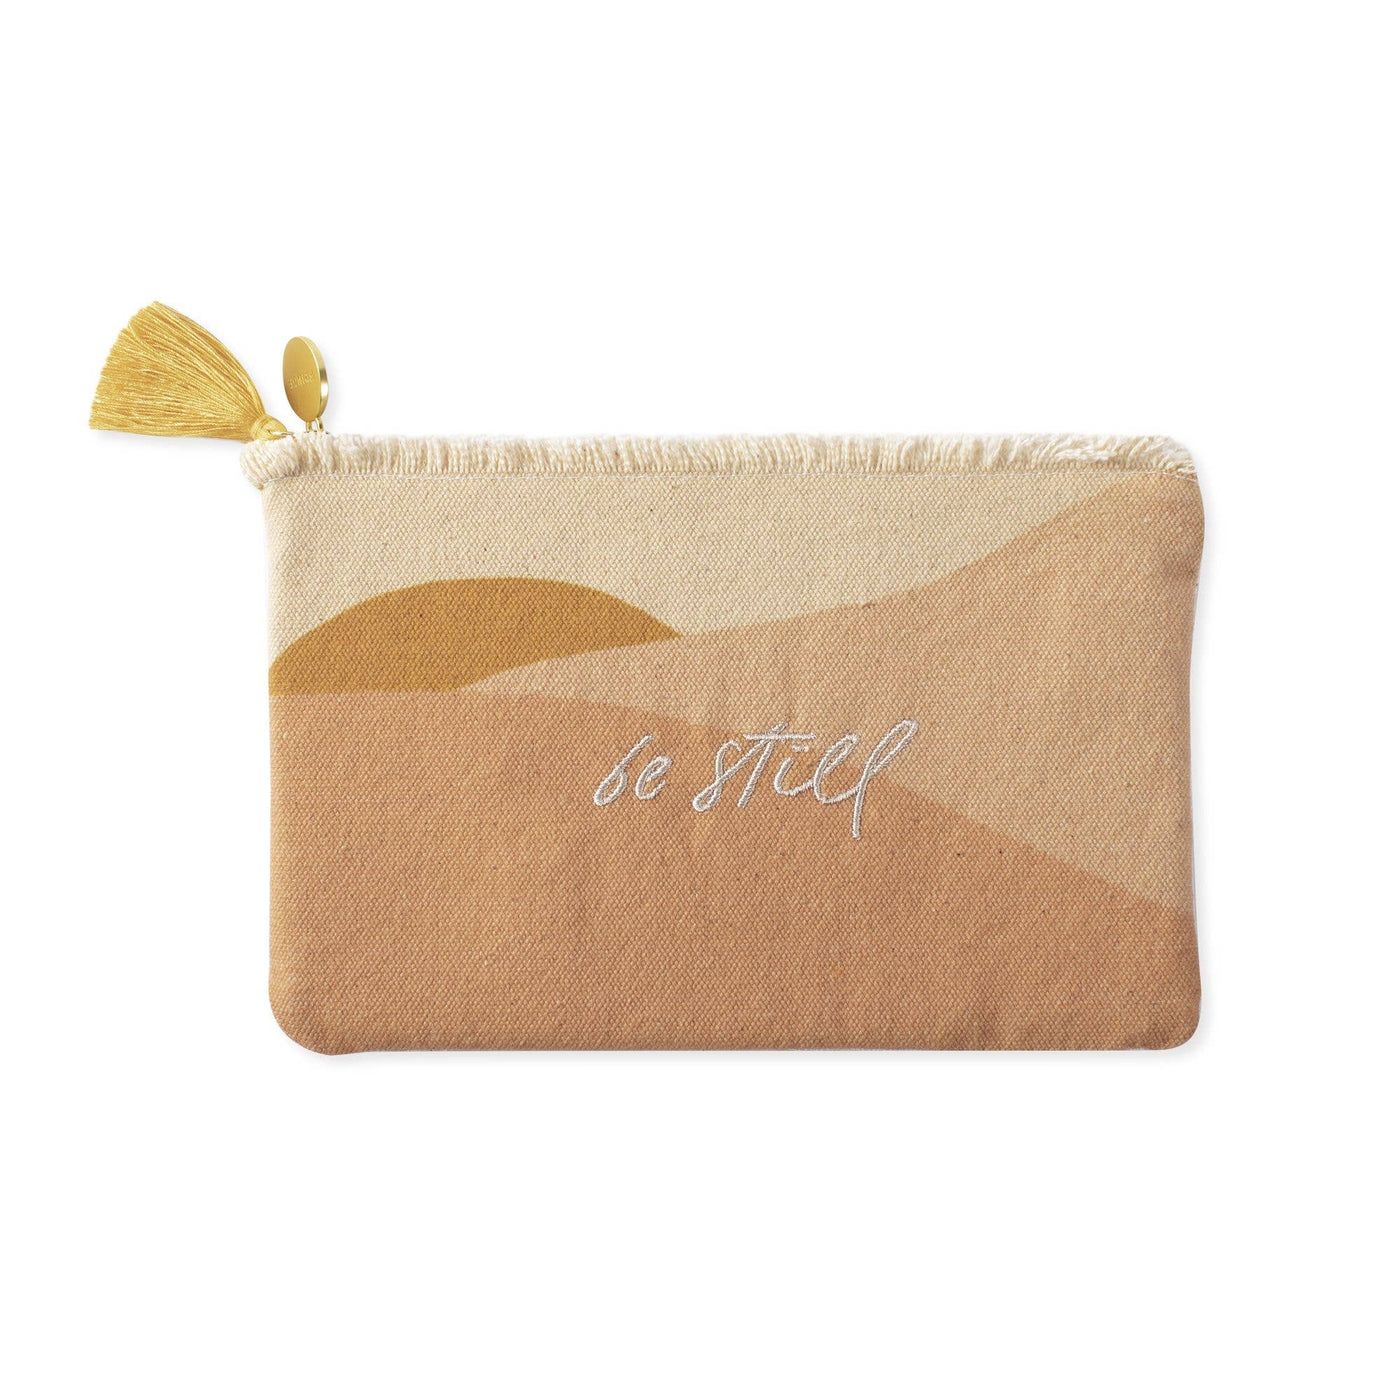 Fringe Studio Canv Mhn Be Still Small Canvas Pouch - Simple Good